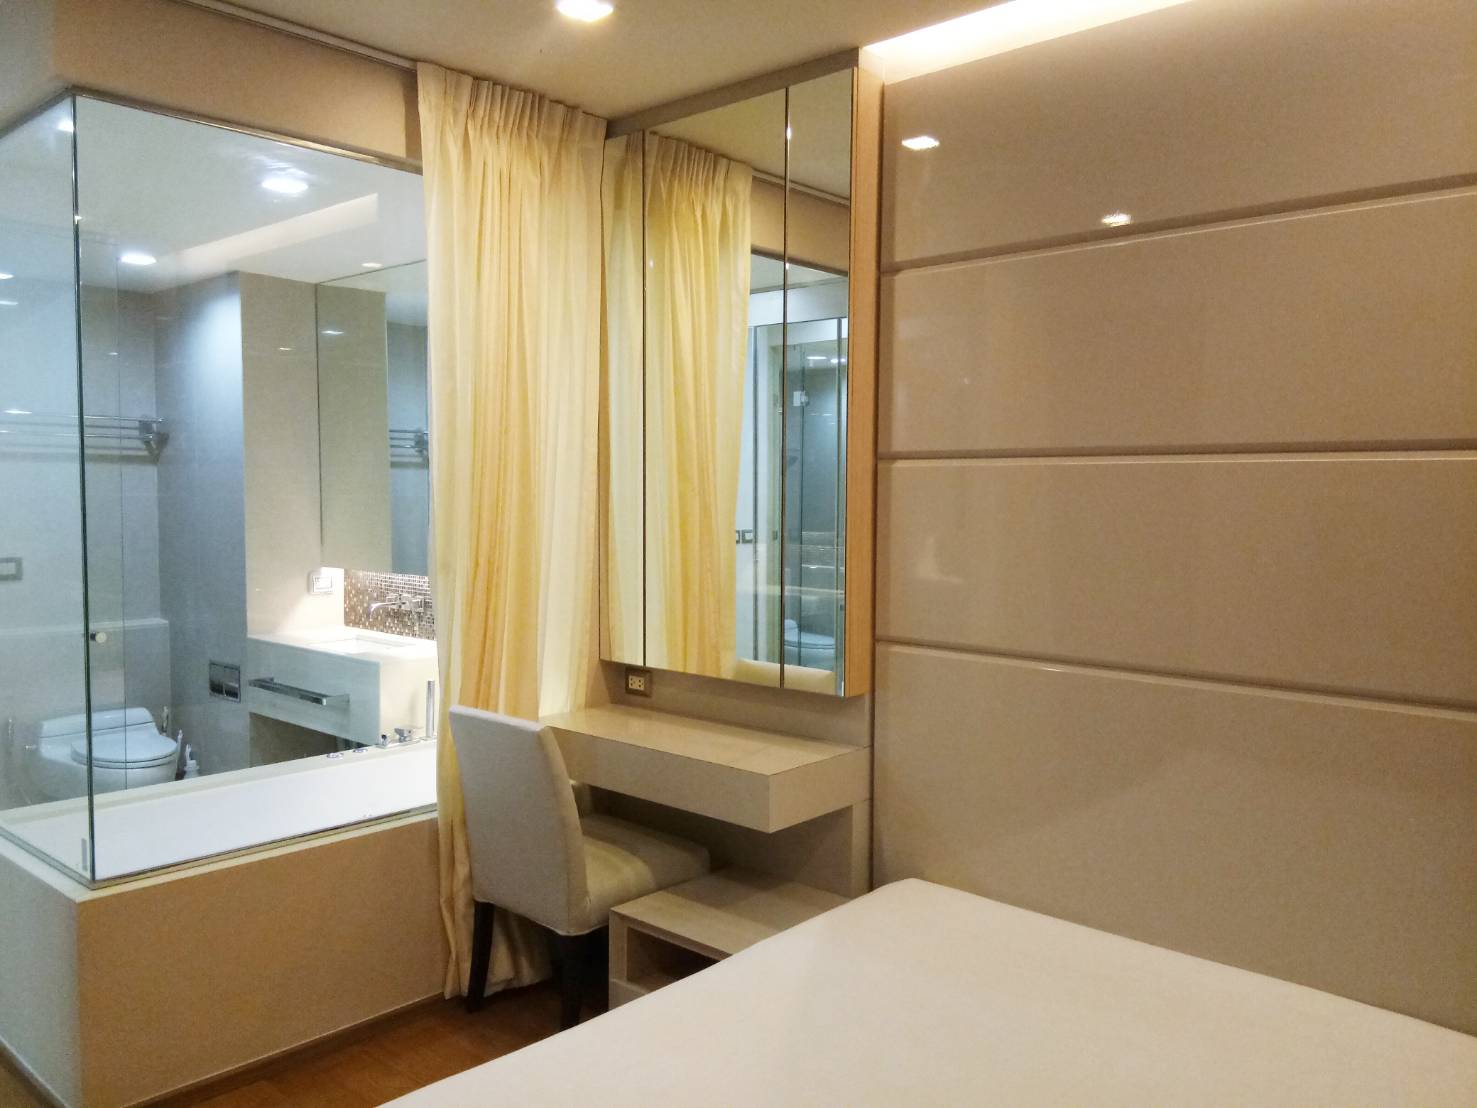 Condo Sale With Tenant Asoke - Top floor - Best Layout - Near MRT - Near Airport Link